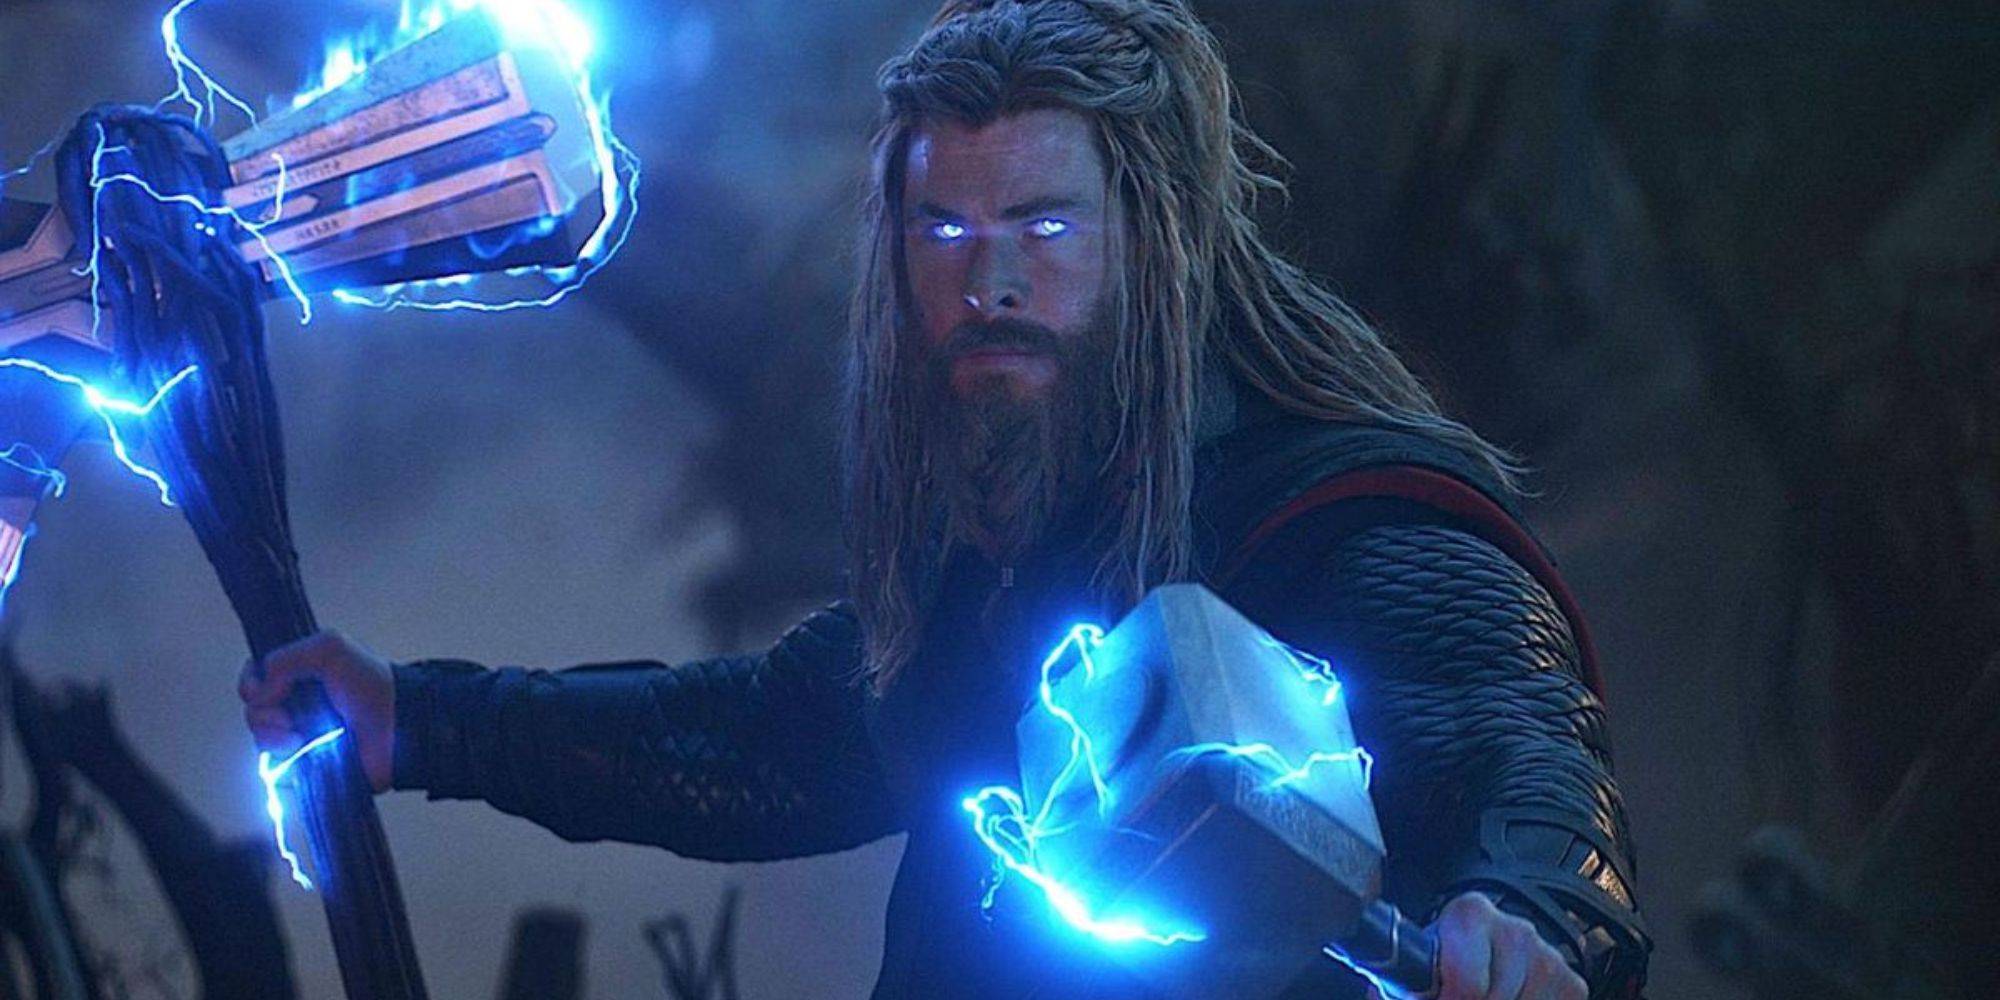 Chris Hemsworth as Thor armed with Mjolnir and Stormbreaker to fight Thanos in the film Avengers: Endgame